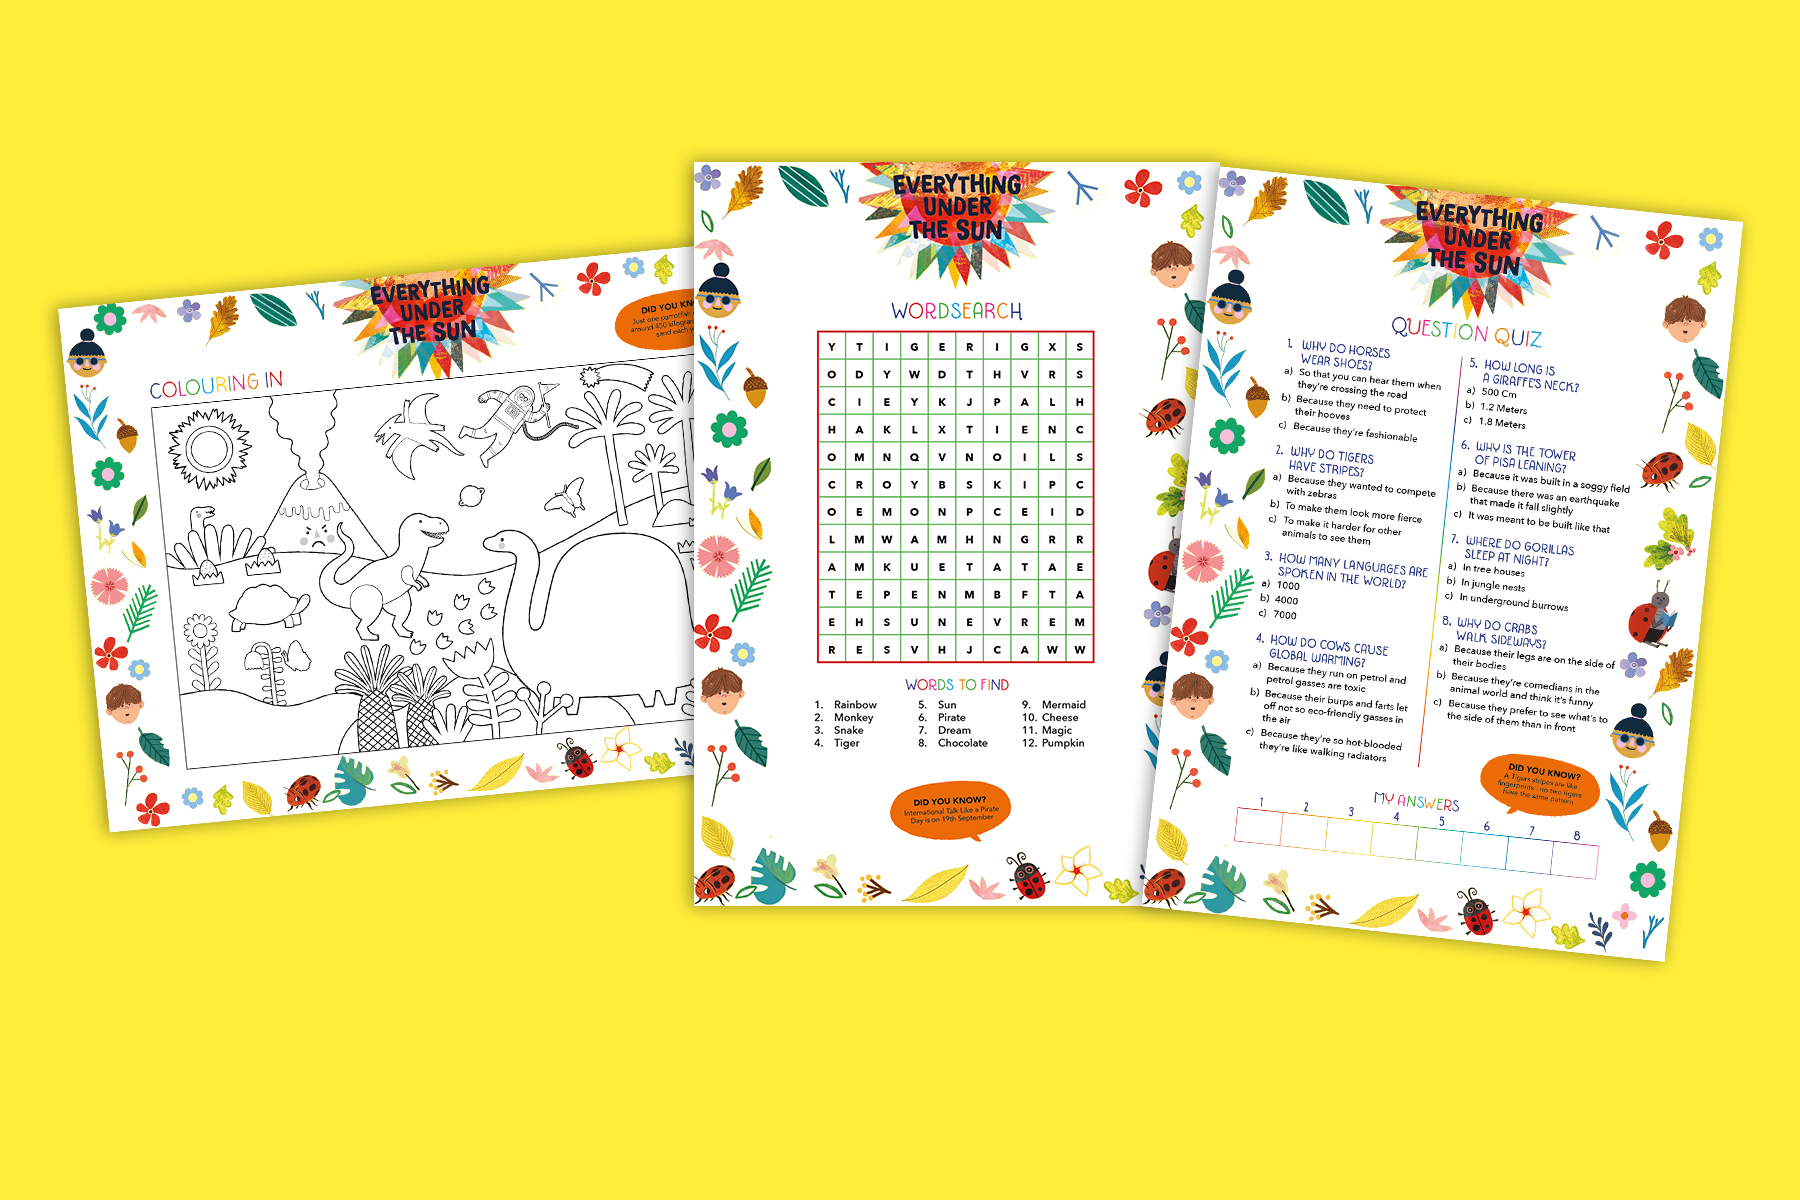 A photo of the Everything Under the Sun activity sheets on a bright yellow background